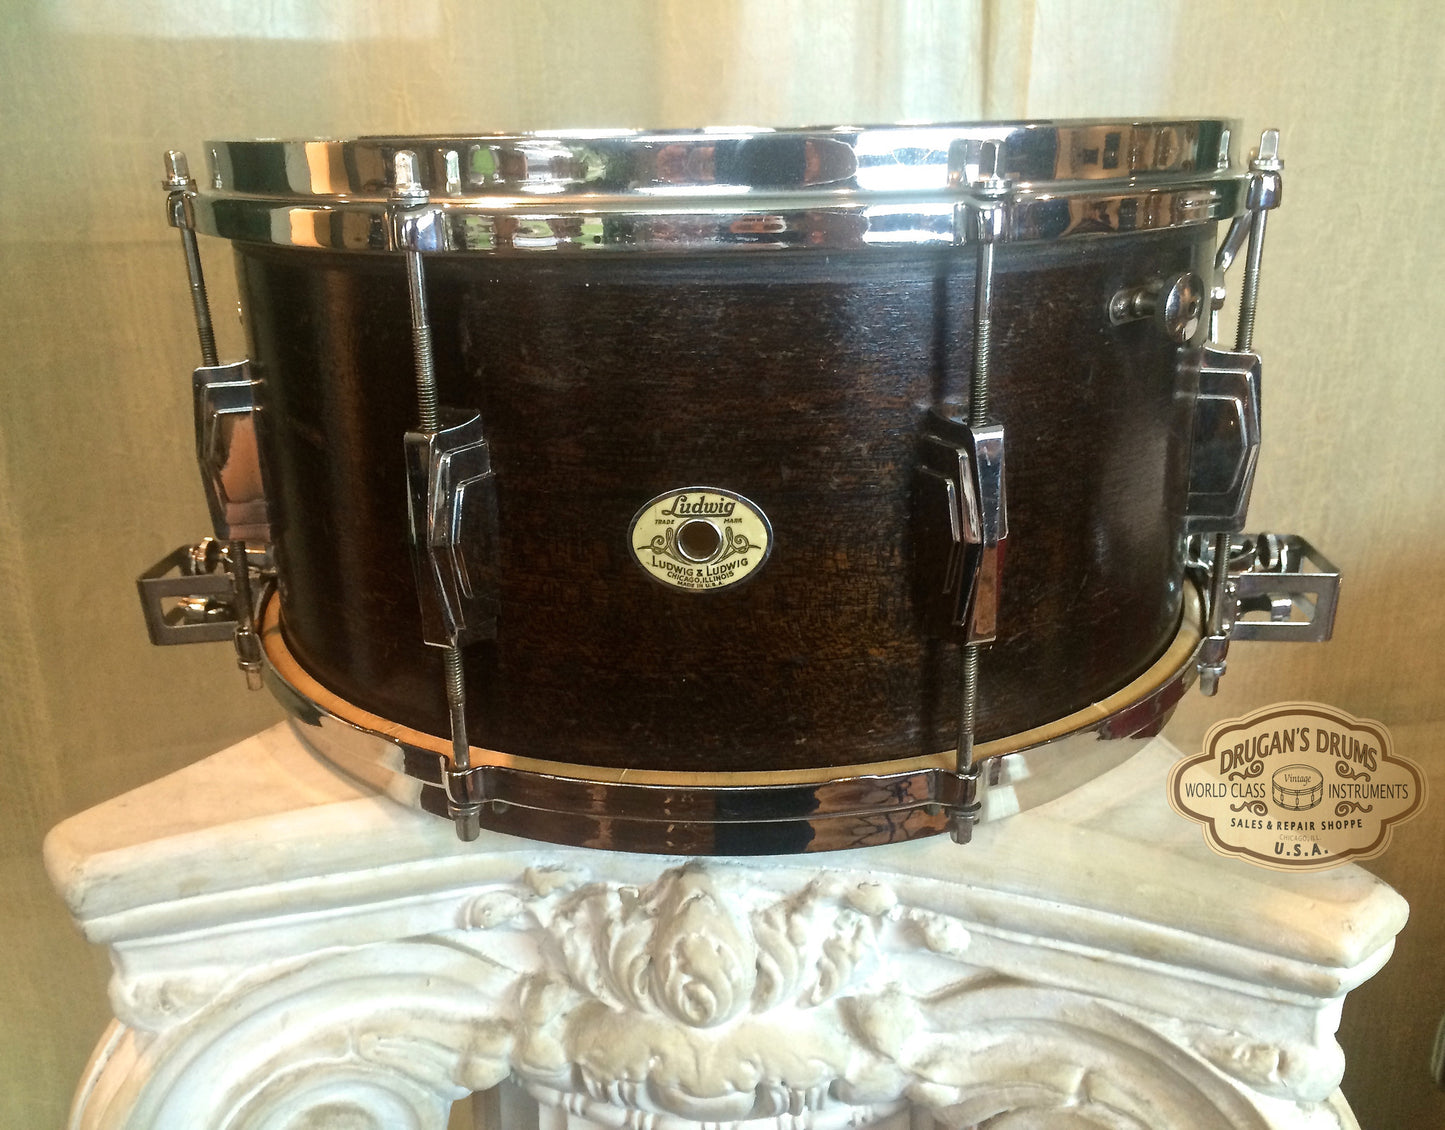 Stunning 1939 Super Ludwig & Ludwig 6.5x14 Snare Drum